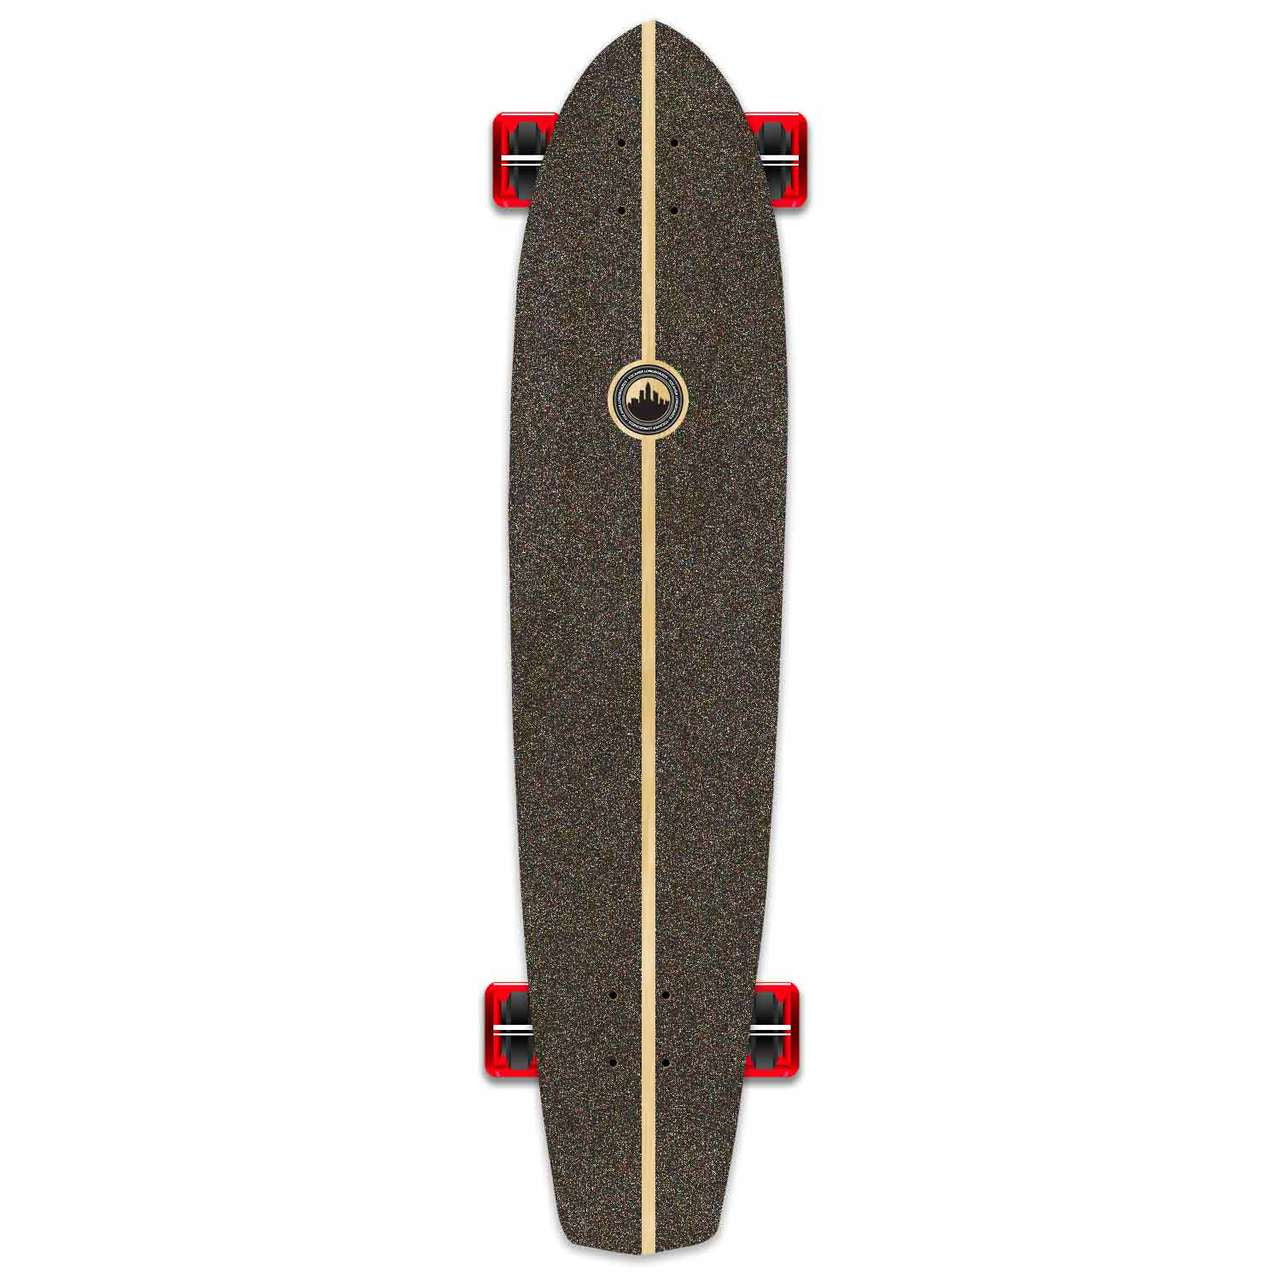 Yocaher Slimkick Longboard Complete - Checker Red